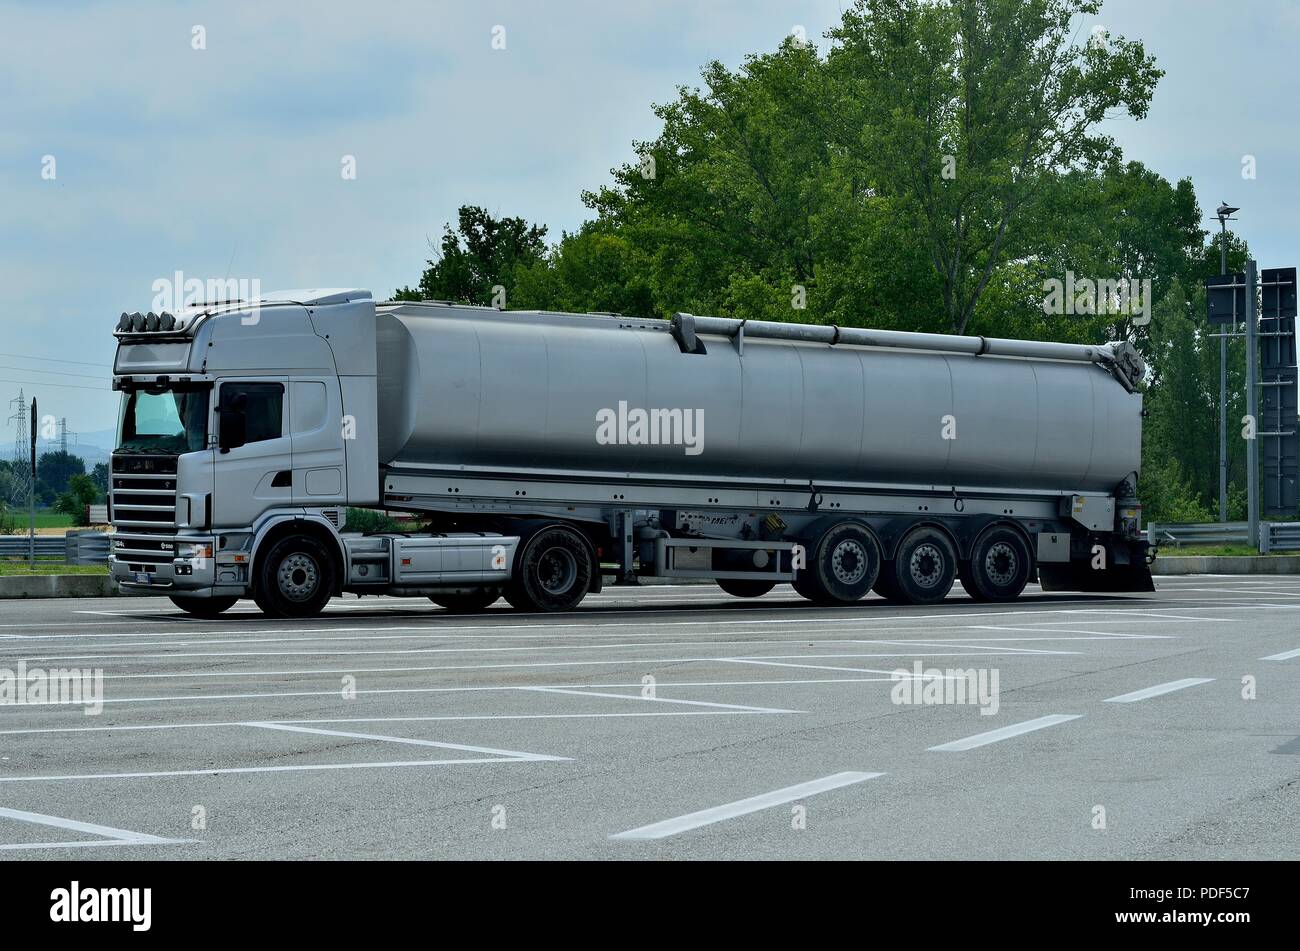 A Silver coloured Scania V580  Multi axle Trailer Truck, parked in a Truck Rest Area along side a highway near Pisa, Italy Stock Photo